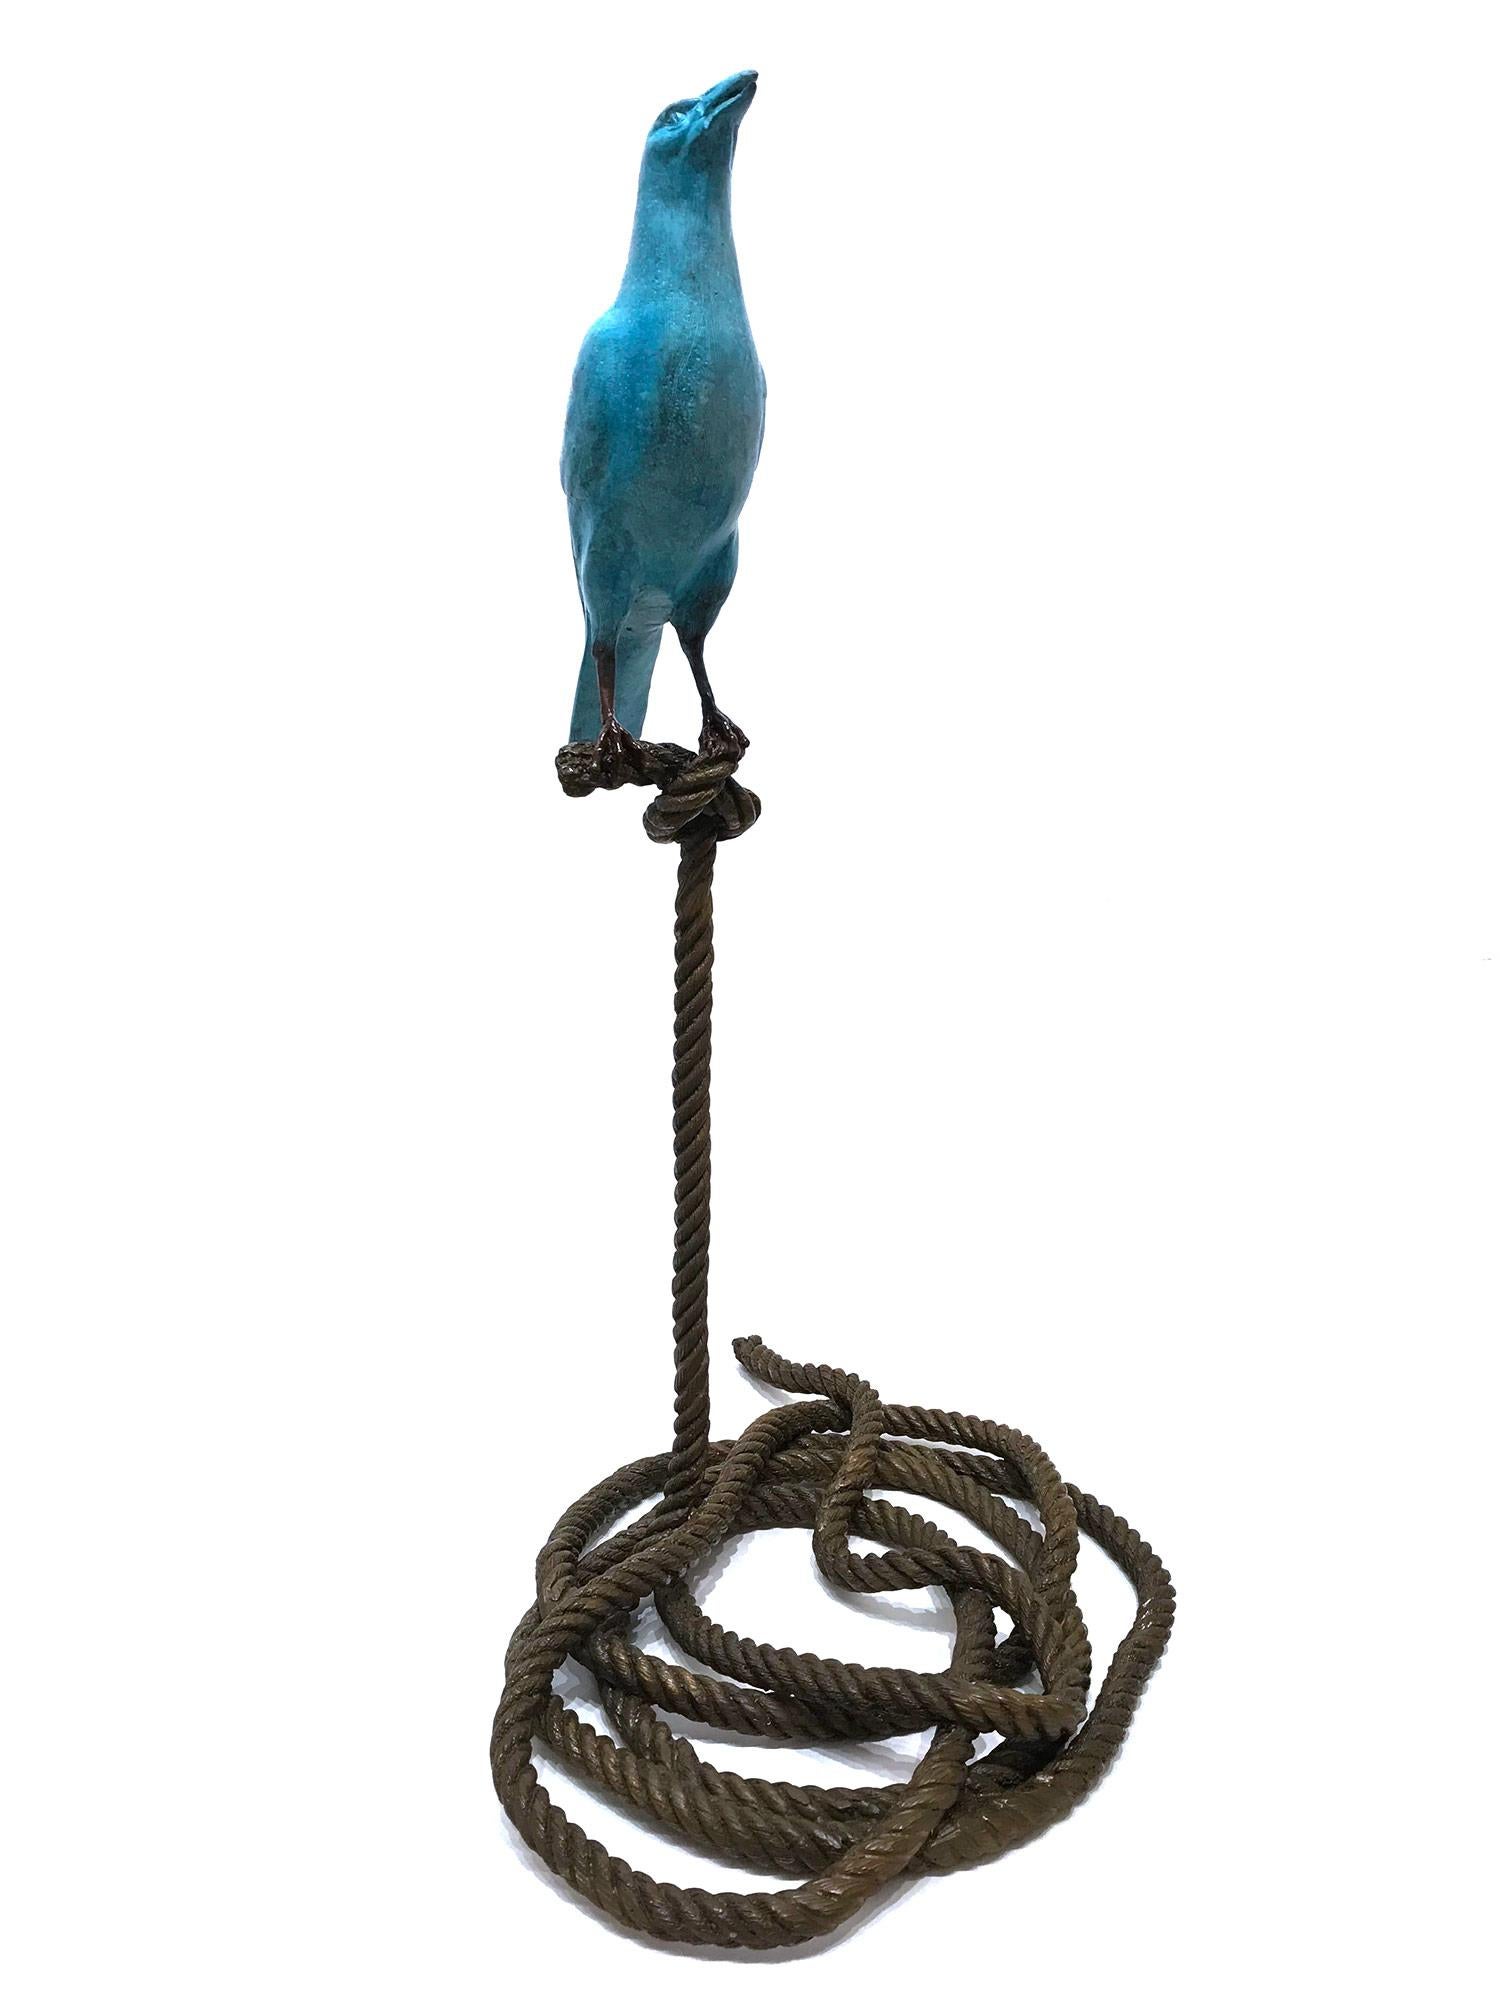 Roger, The Magpie on Rope - Sculpture by Gillie and Marc Schattner